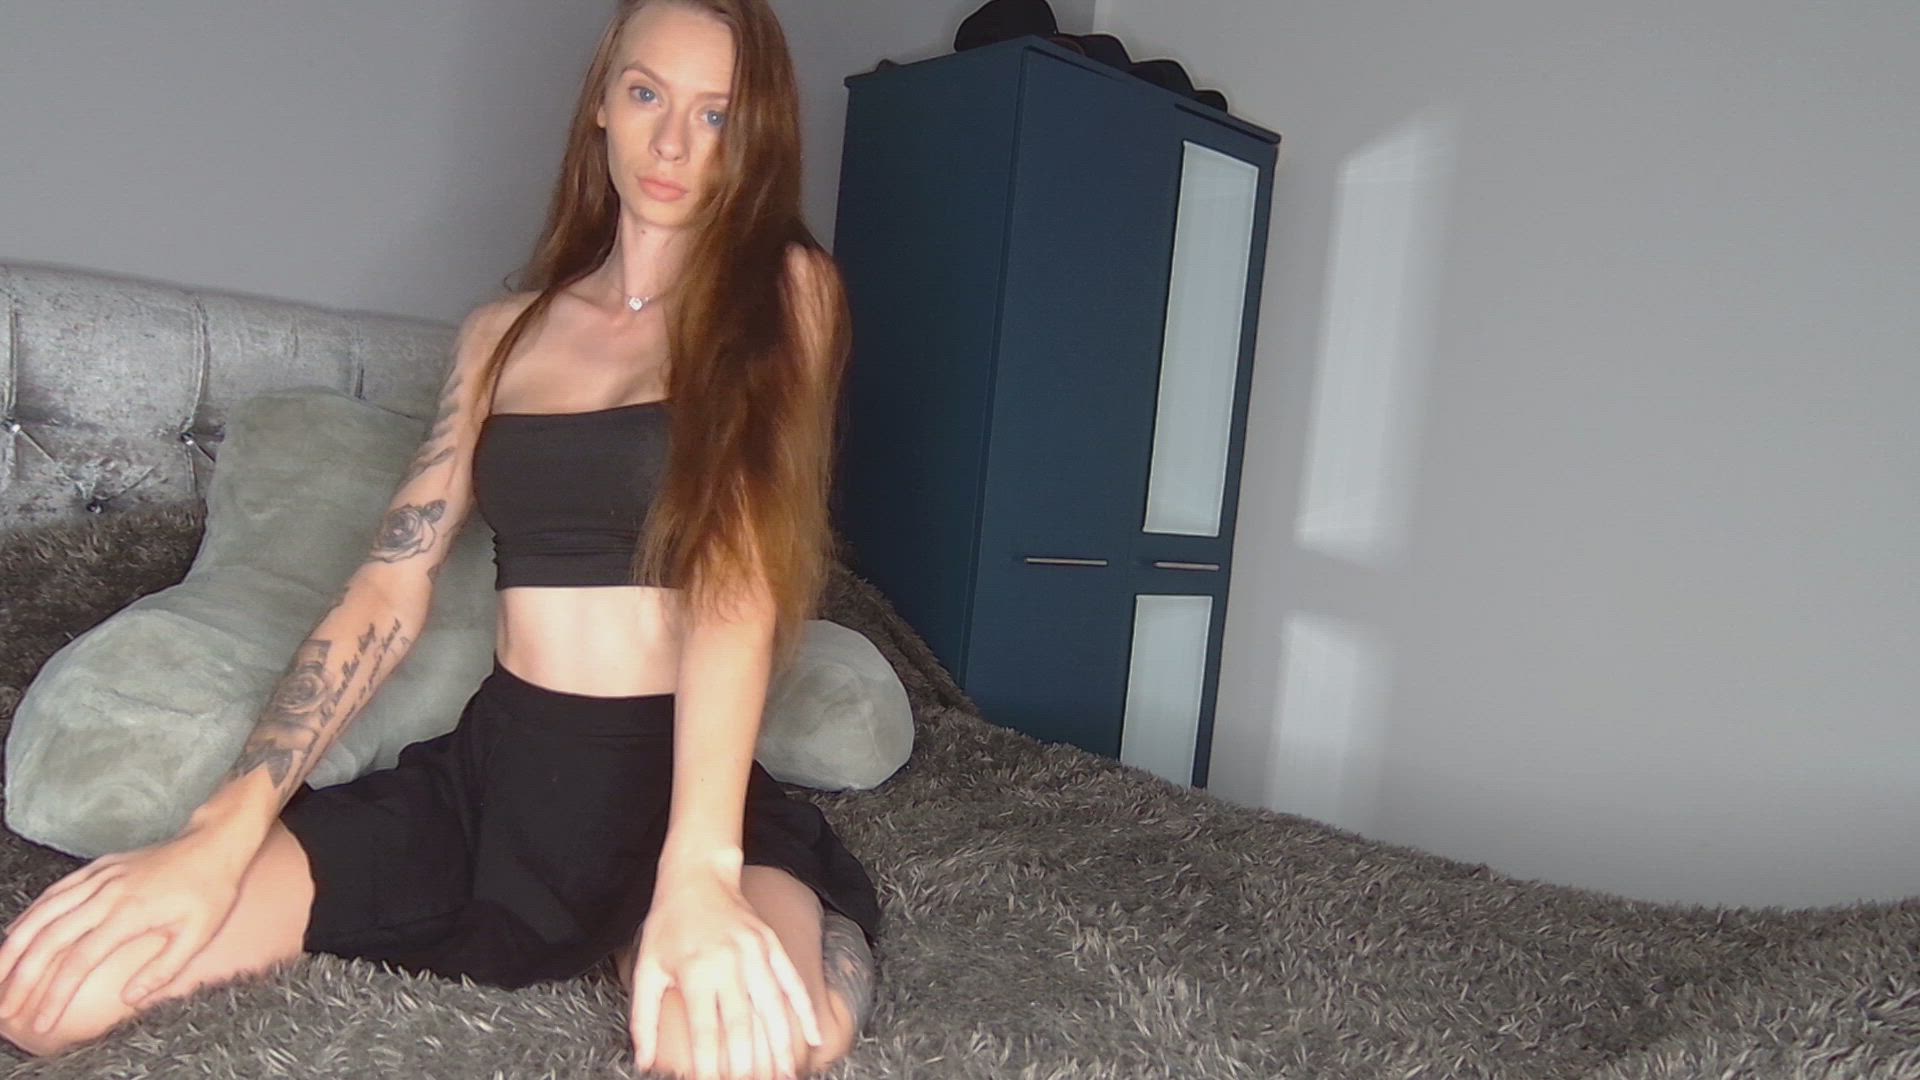 Amateur porn video with onlyfans model amyember23 <strong>@amyember</strong>